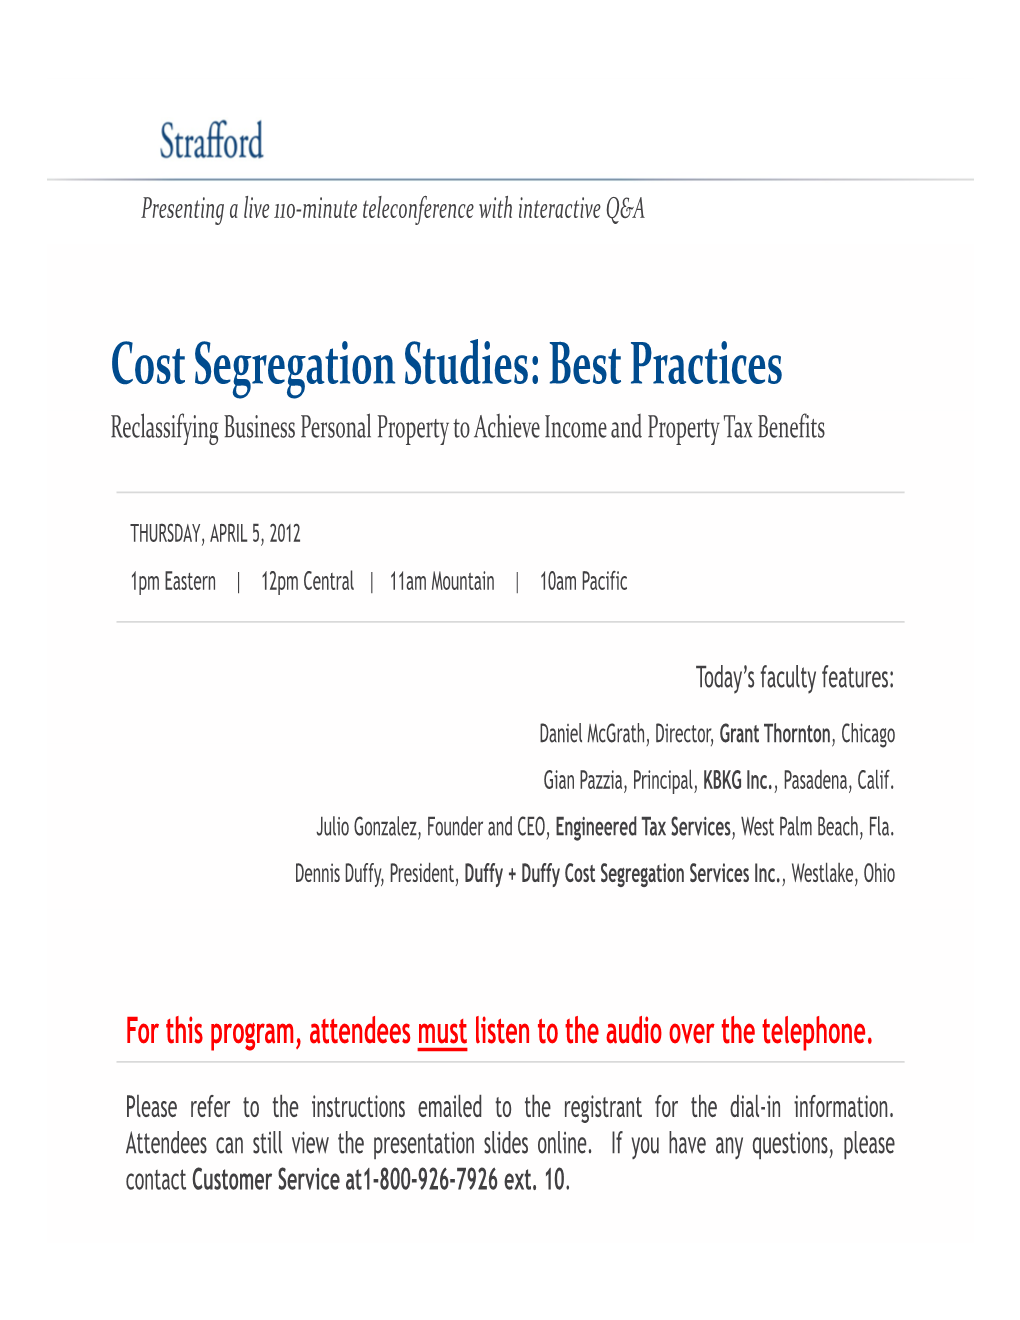 Cost Segregation Studies: Best Practices Reclassifying Business Personal Property to Achieve Income and Property Tax Benefits